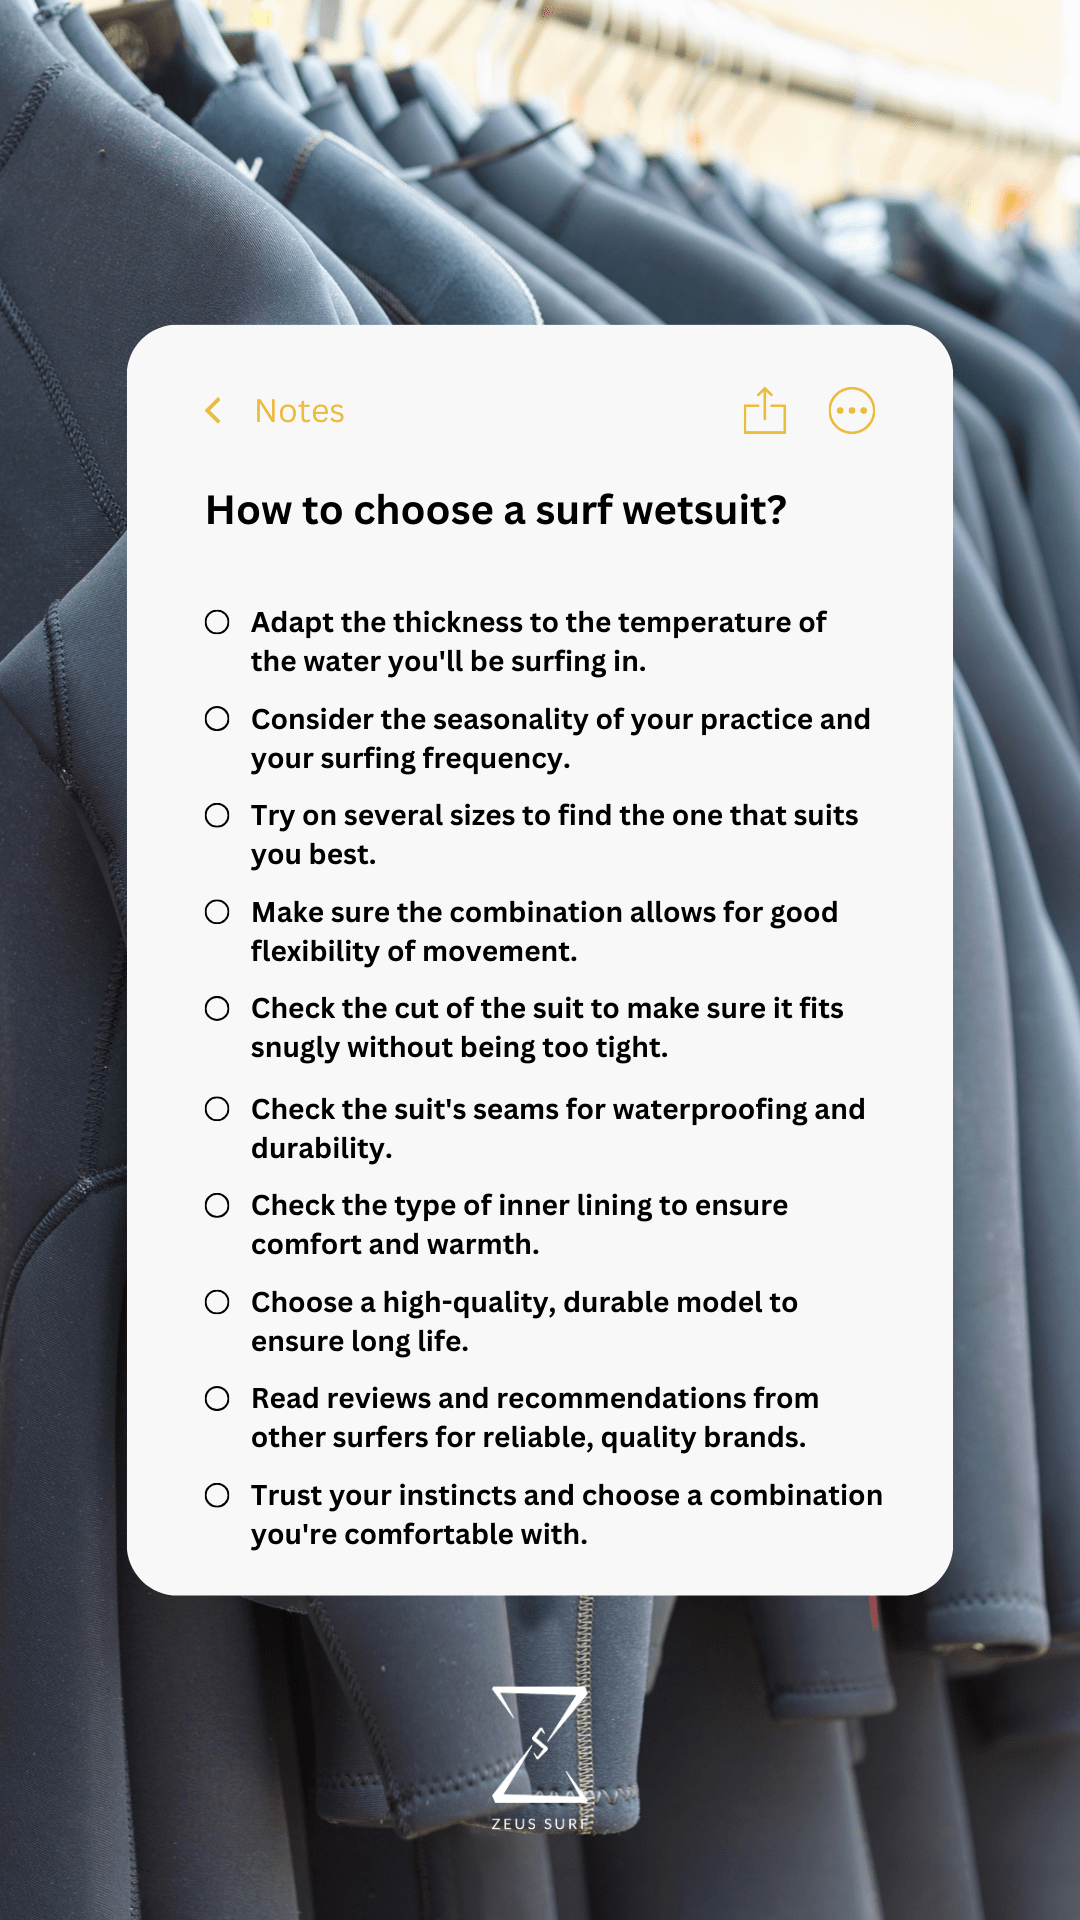 How to choose a surf wetsuit